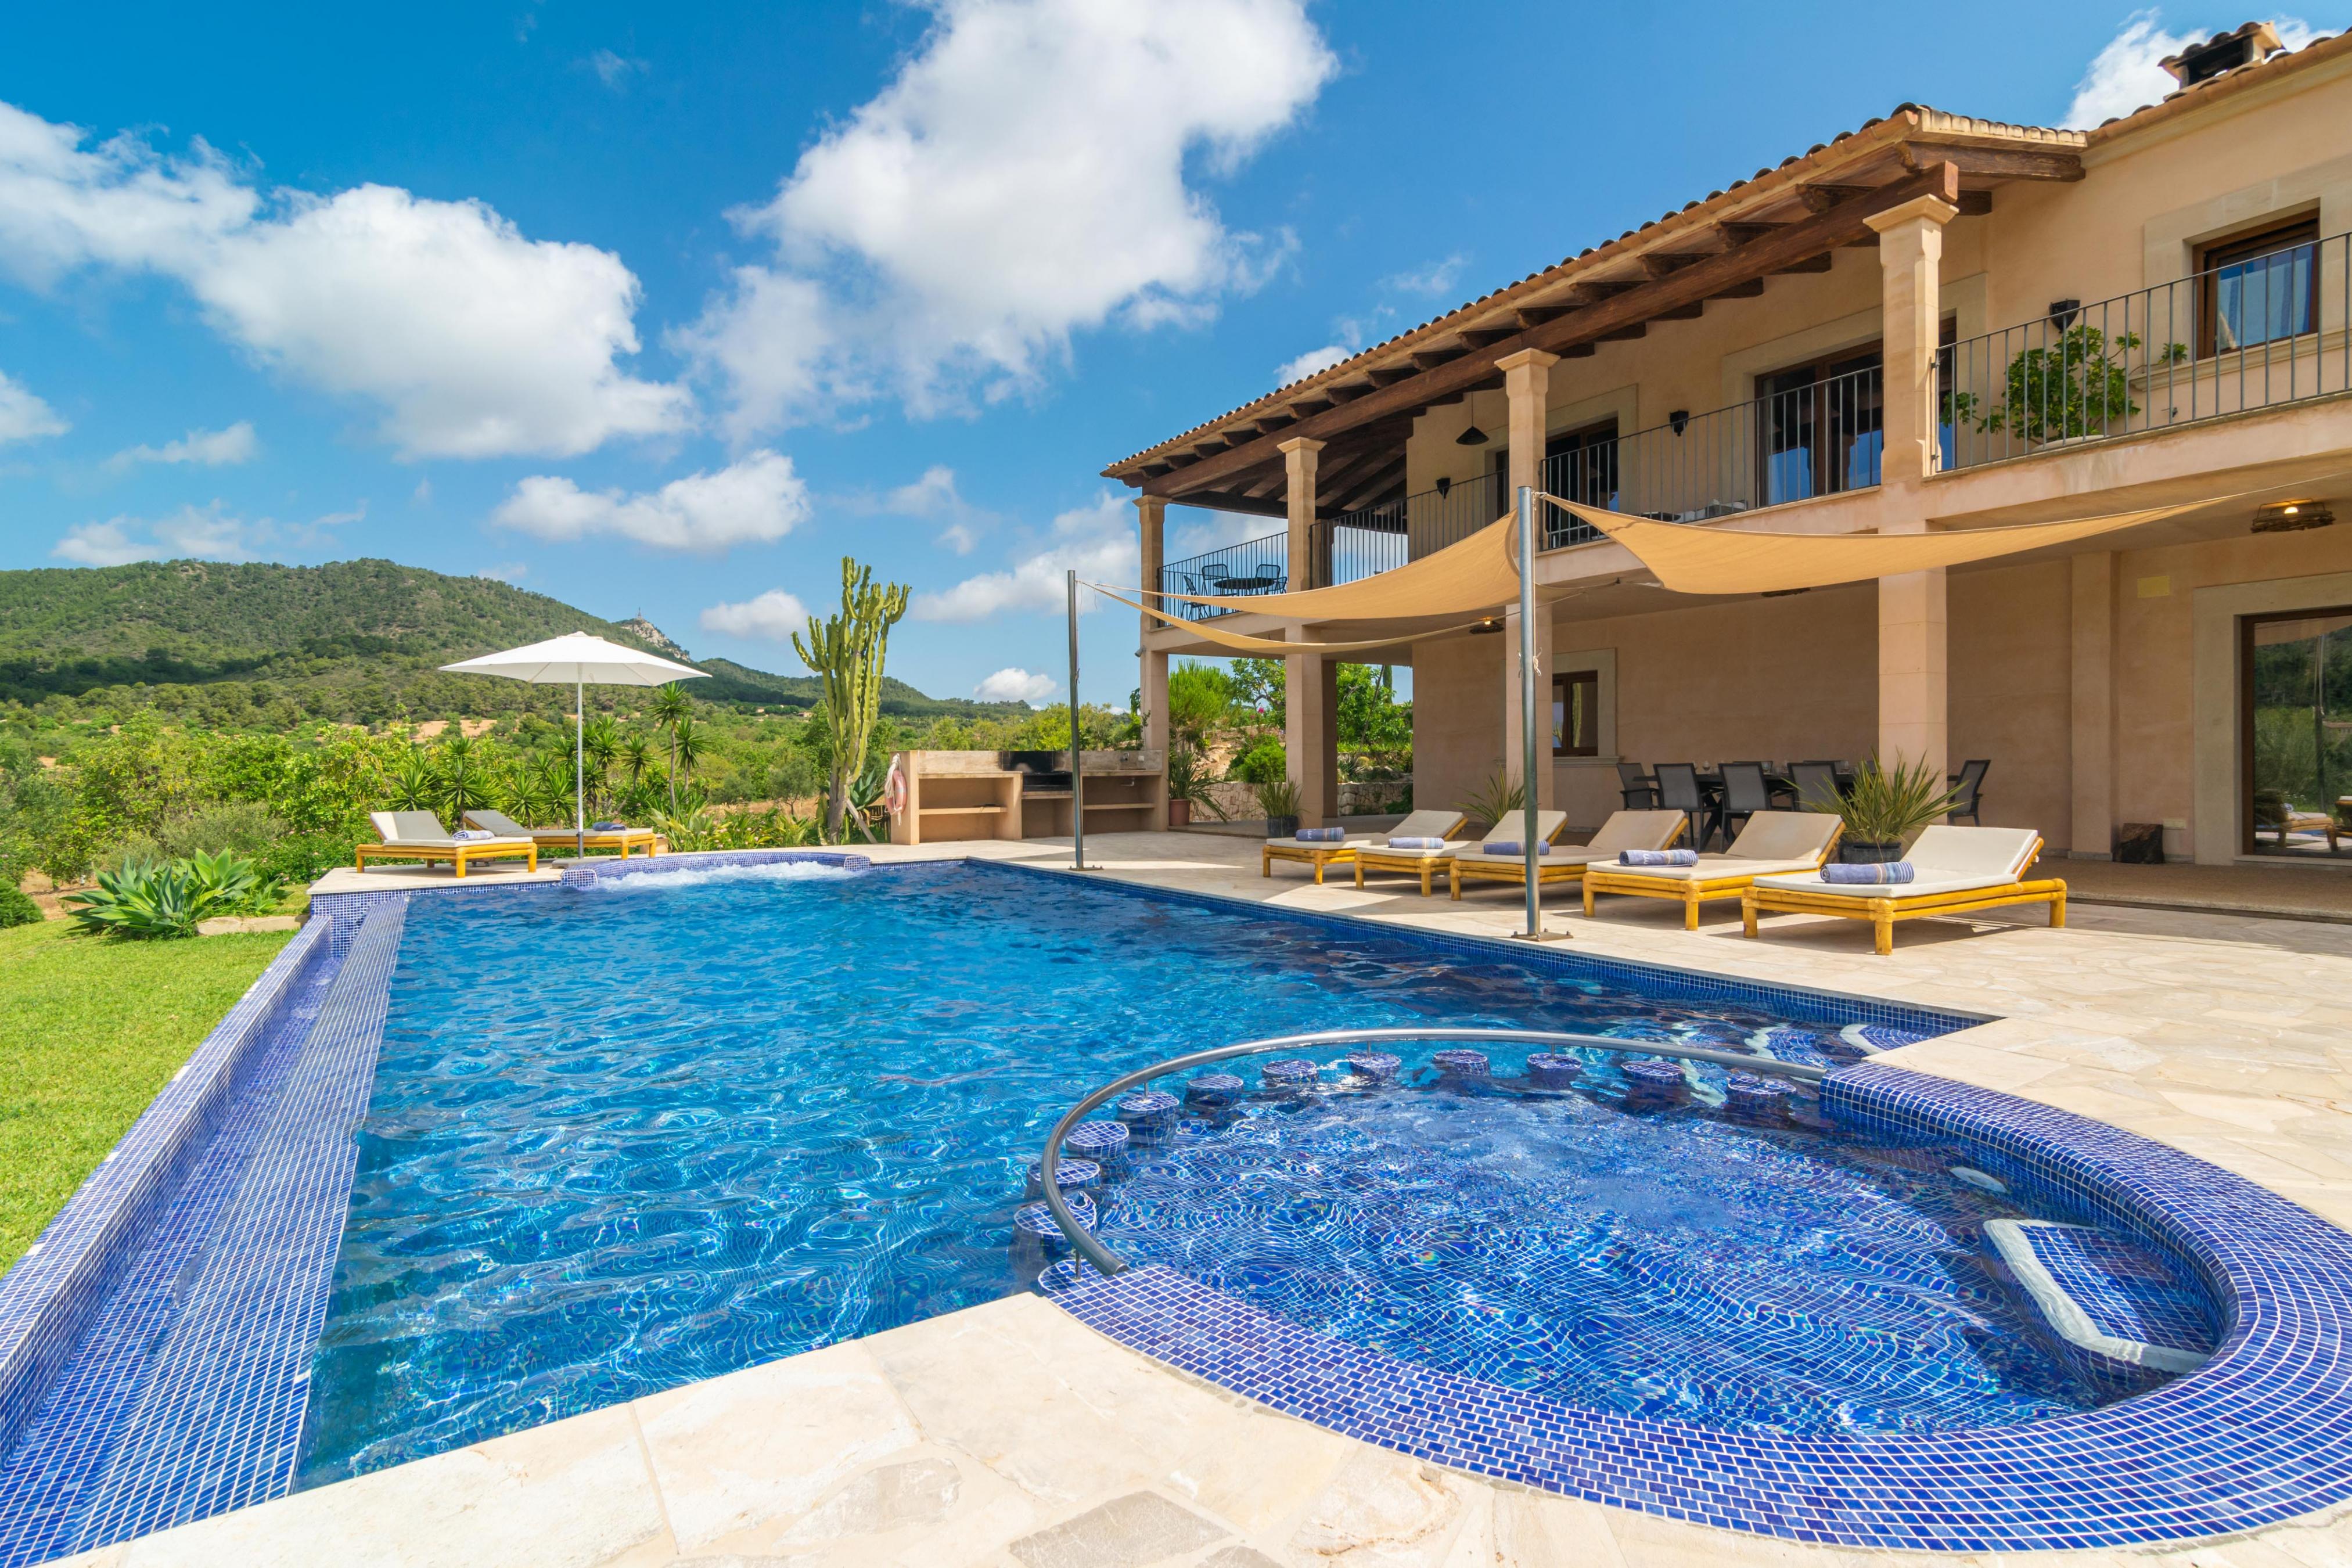 Property Image 1 - S’ALBARCOQUER - Stunning villa with private swimming pool and free WiFi